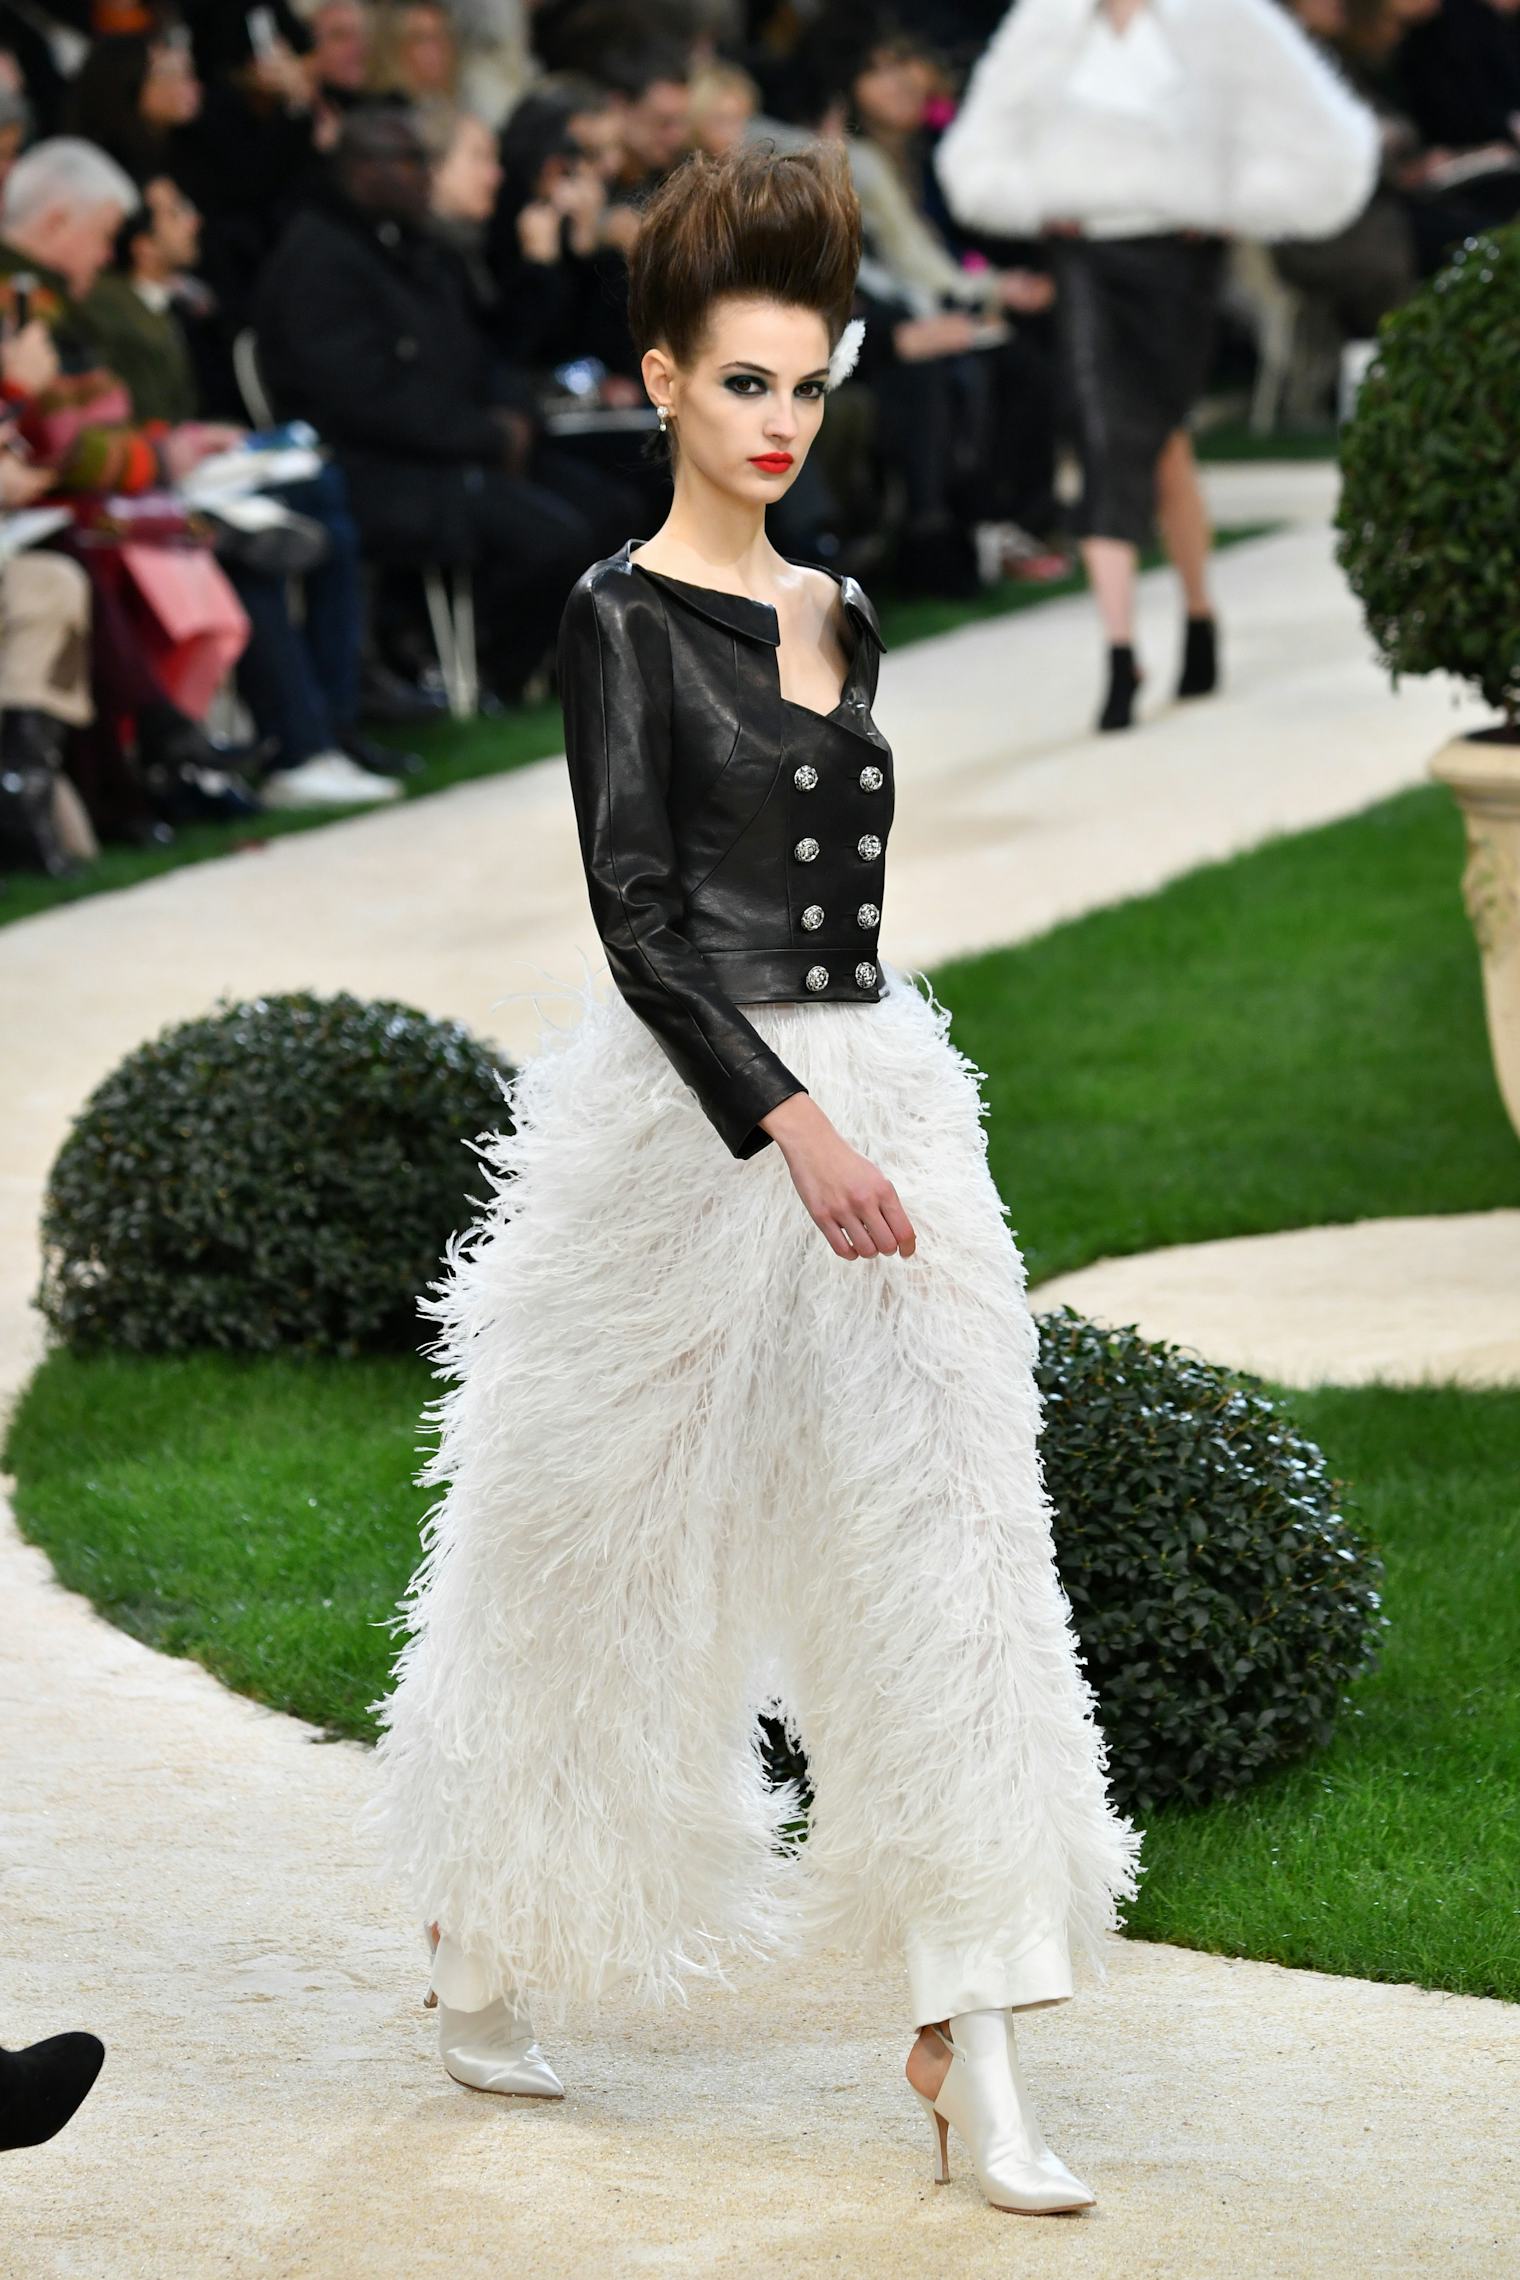 Photos From One Of Karl Lagerfeld's Last Chanel Shows Display His ...